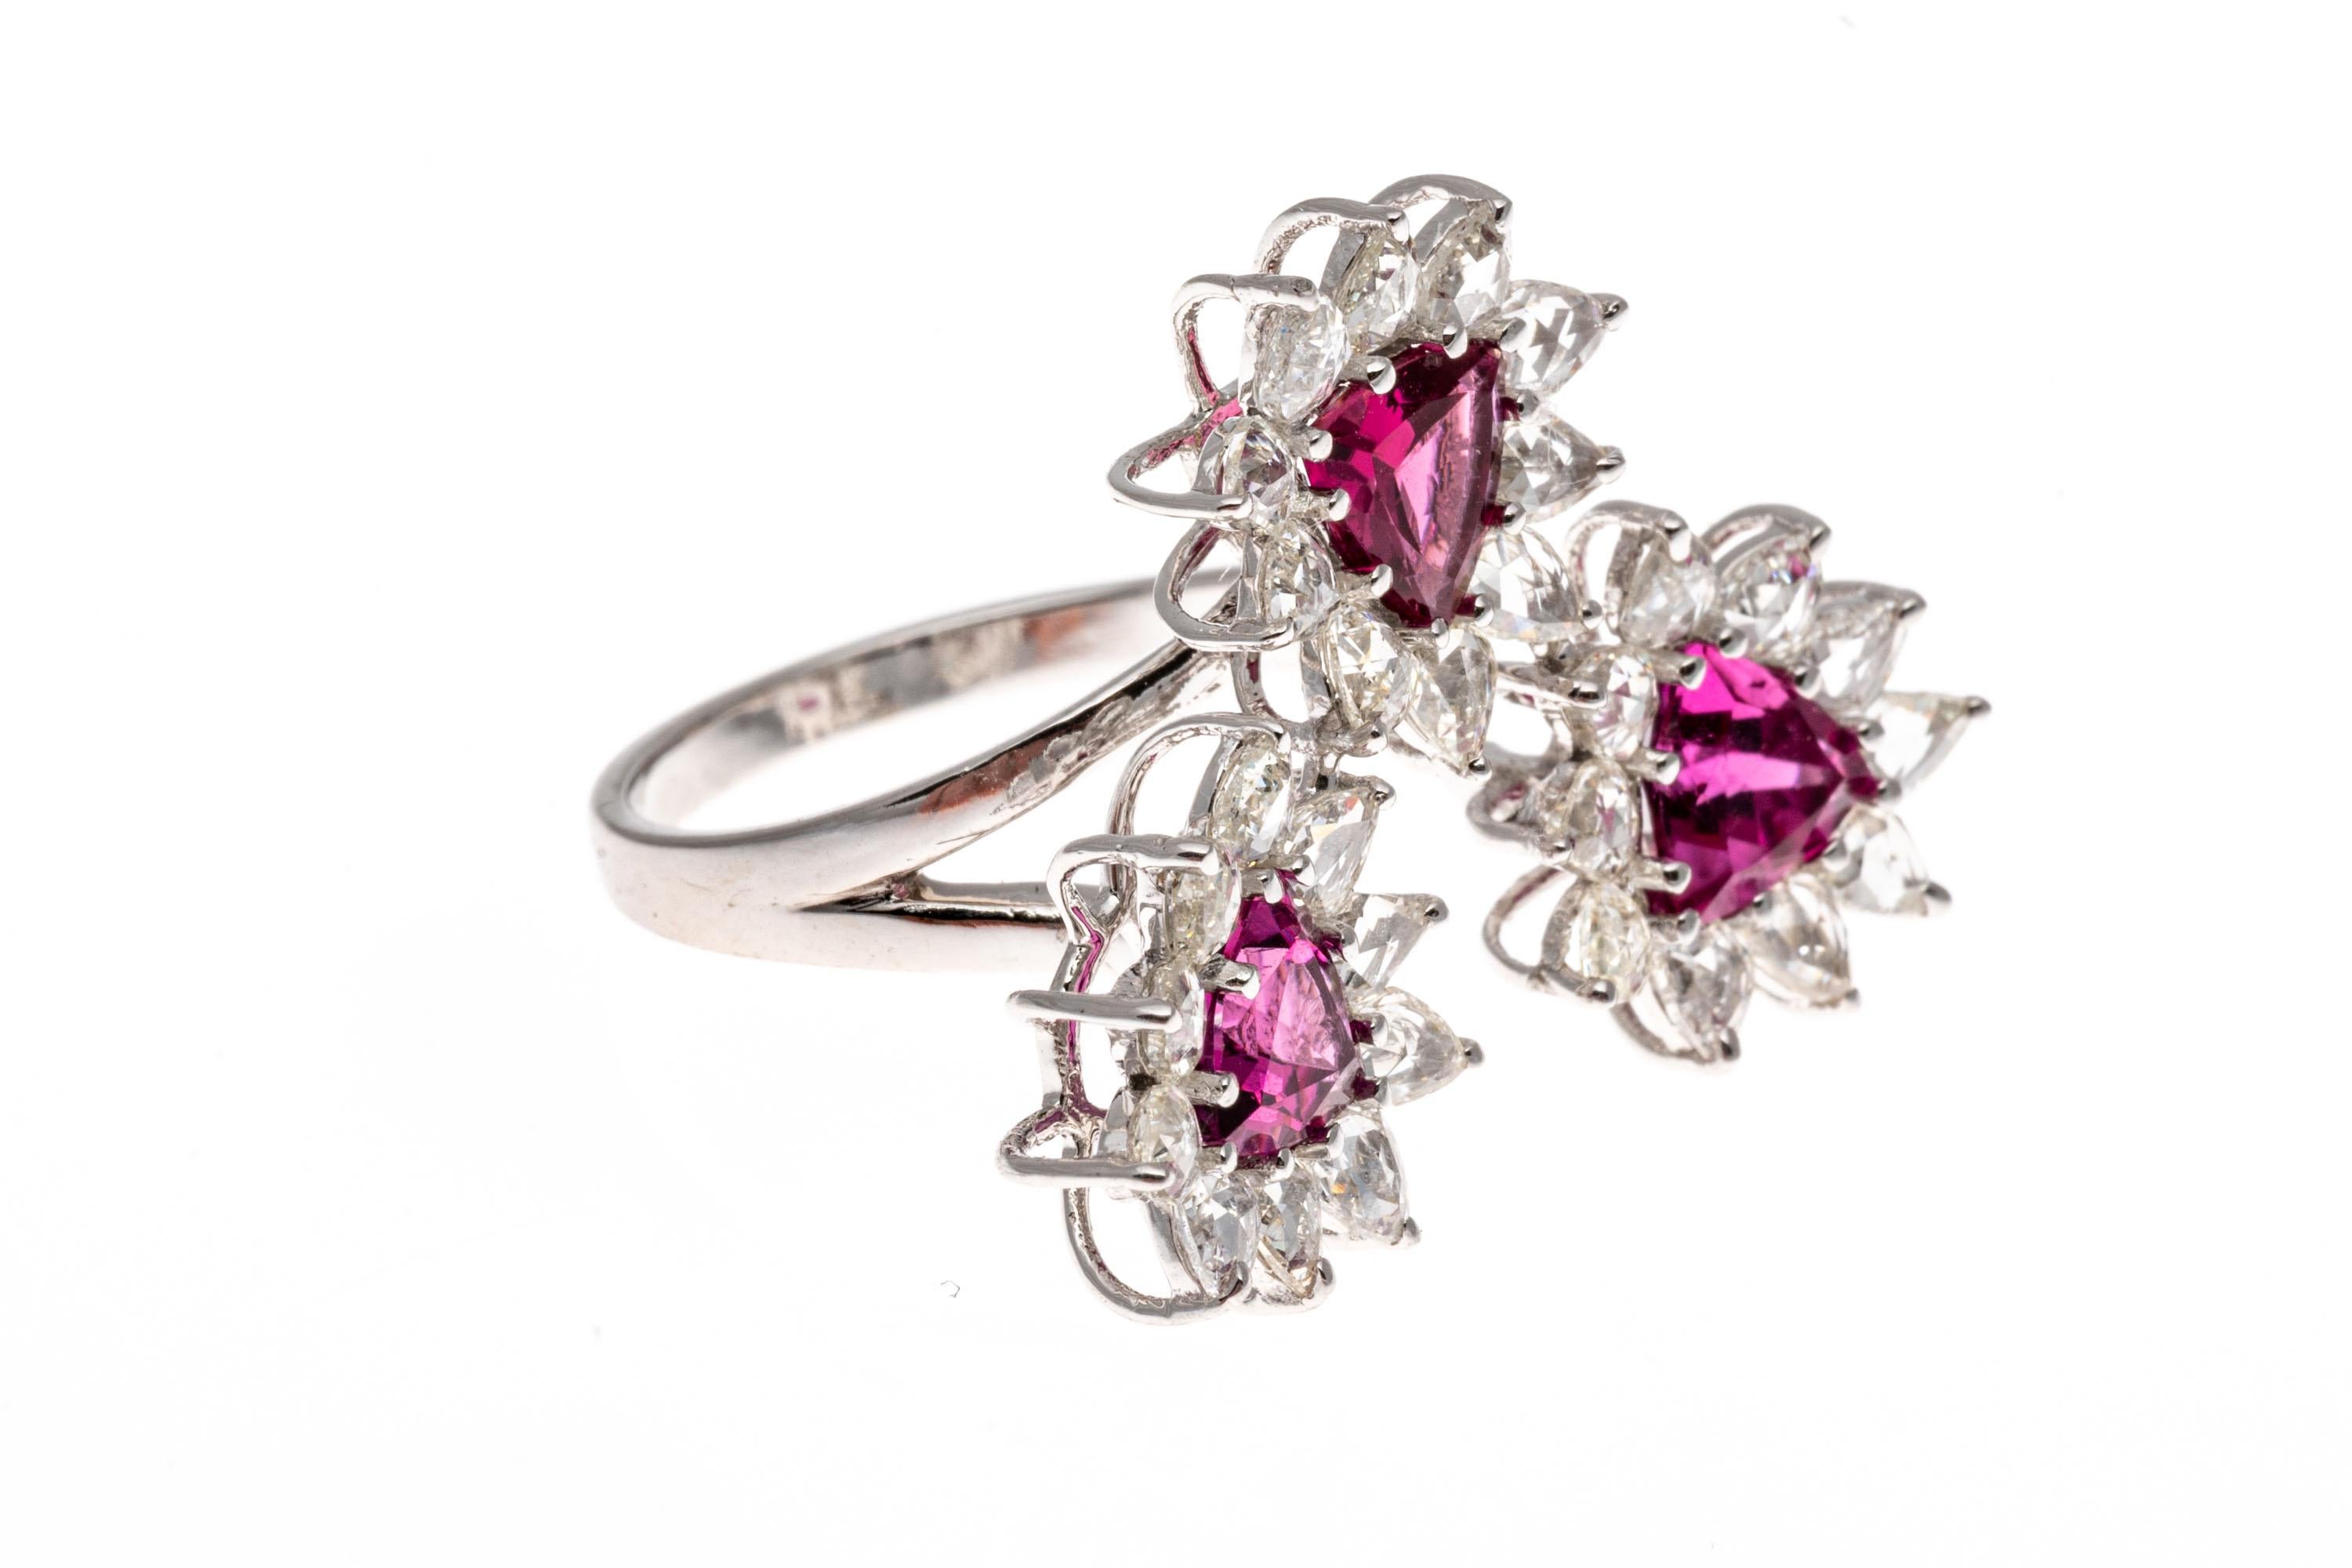 18k white gold ring. This absolutely beautiful ring contains three flower clusters, each set with a center, trillion faceted, dark bright pink color pink tourmaline, approximately 1.50 TCW, and prong set. Framing each pink tourmaline is a pear